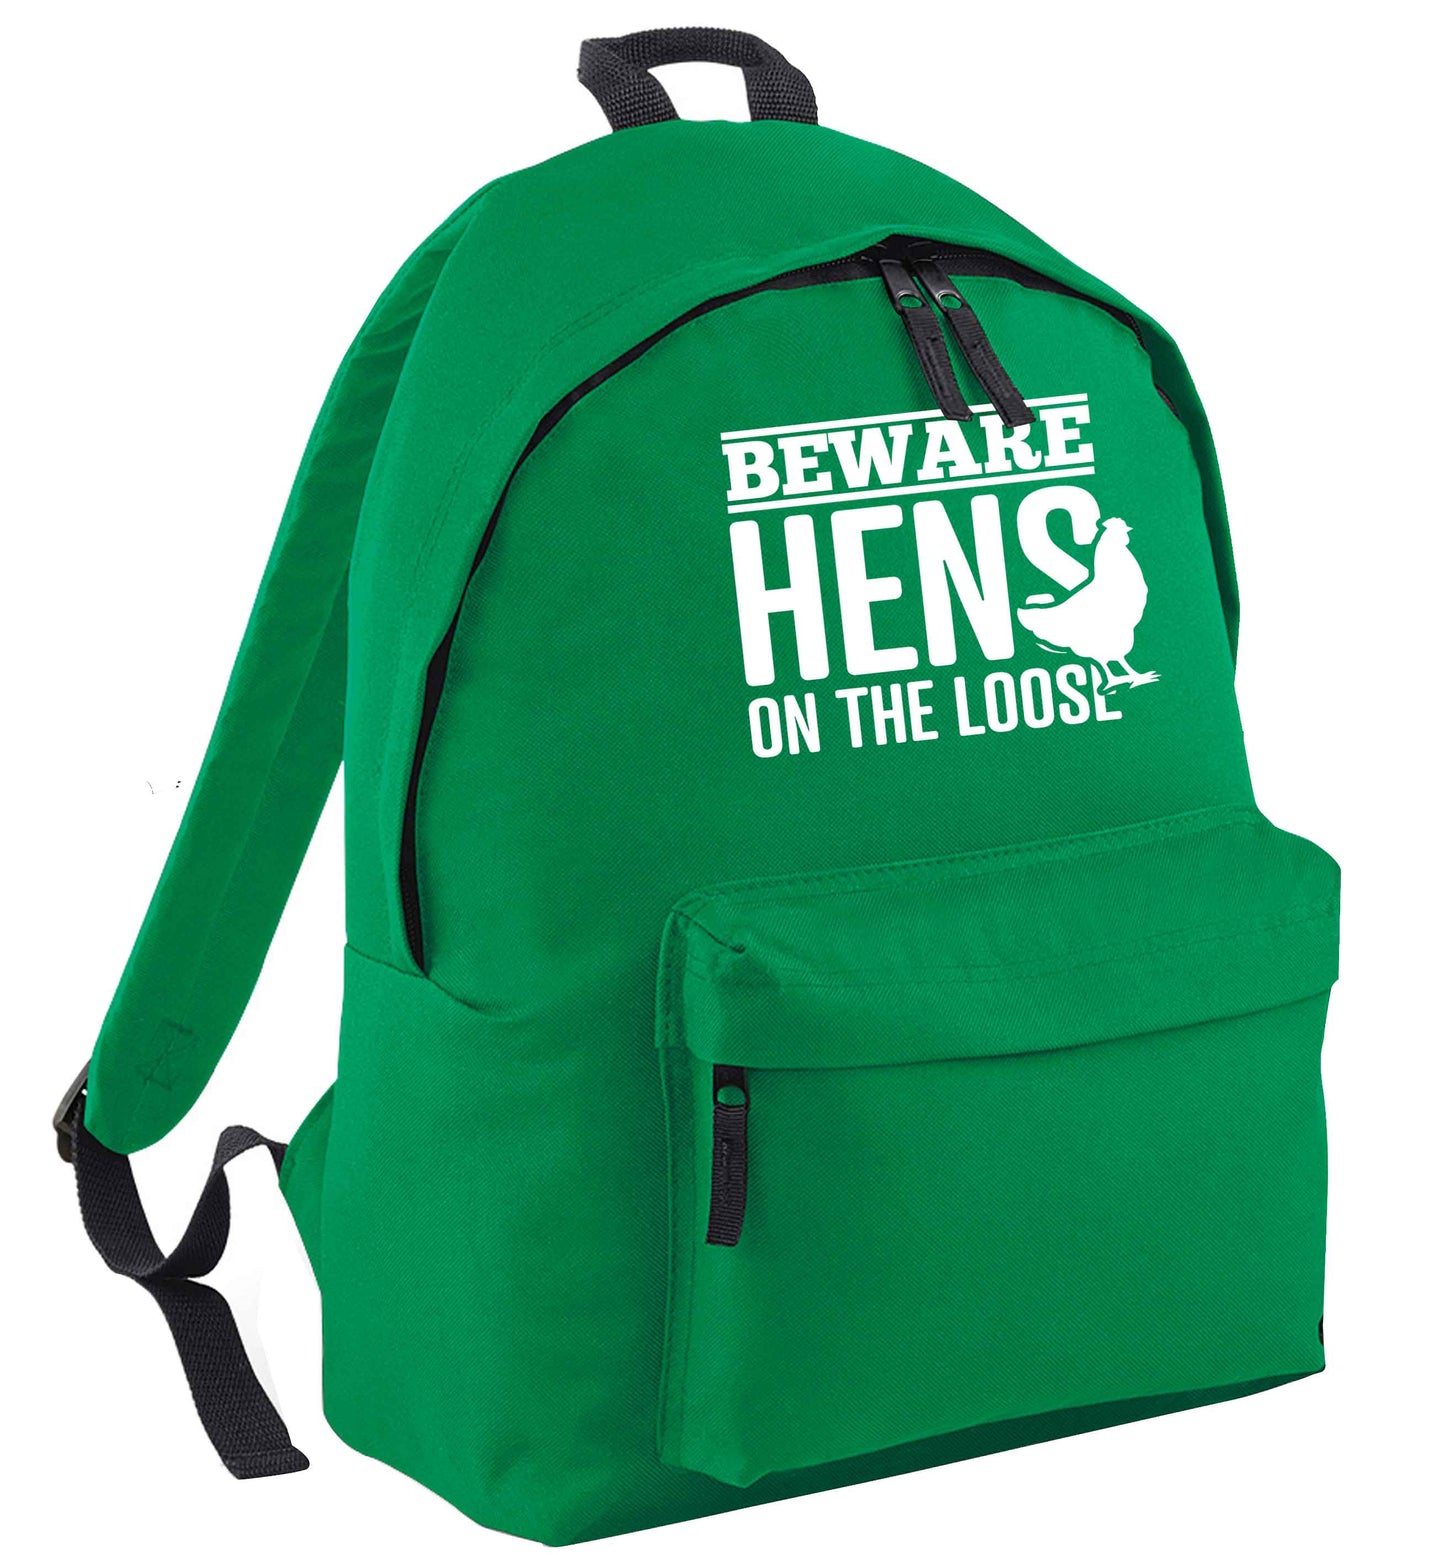 Beware hens on the loose green adults backpack